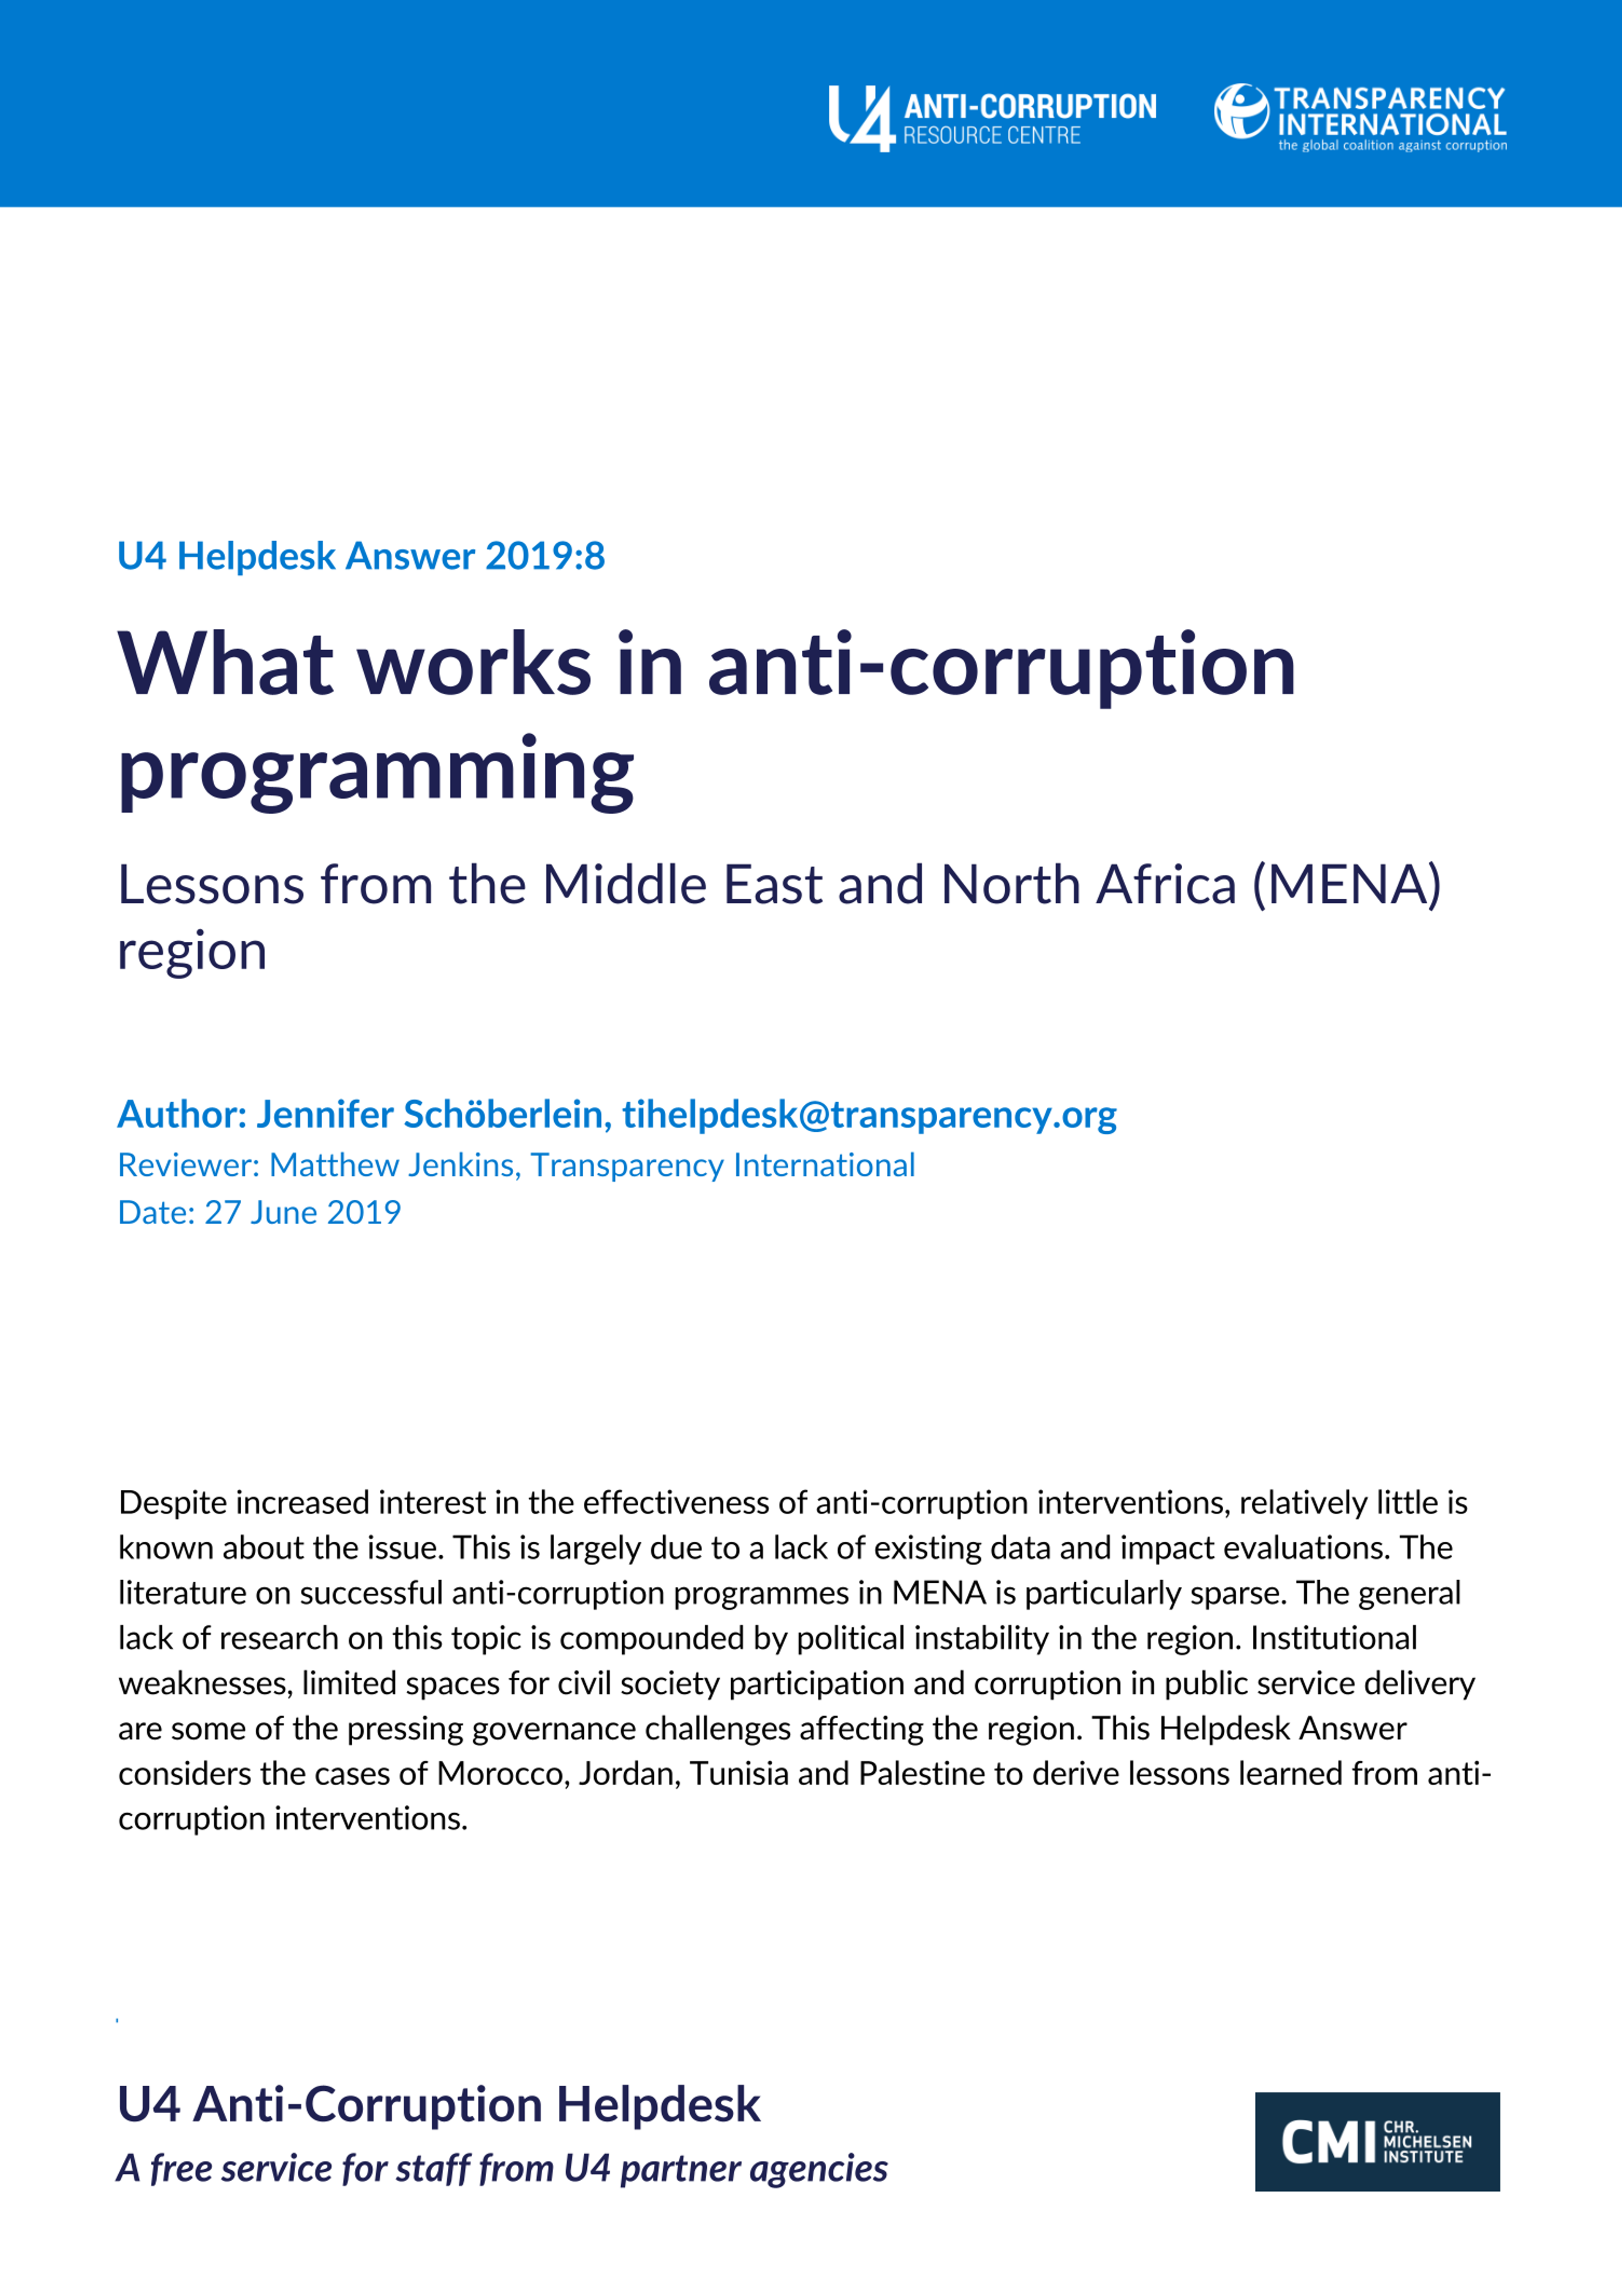 What works in anti-corruption programming: Lessons from the Middle East and North Africa region